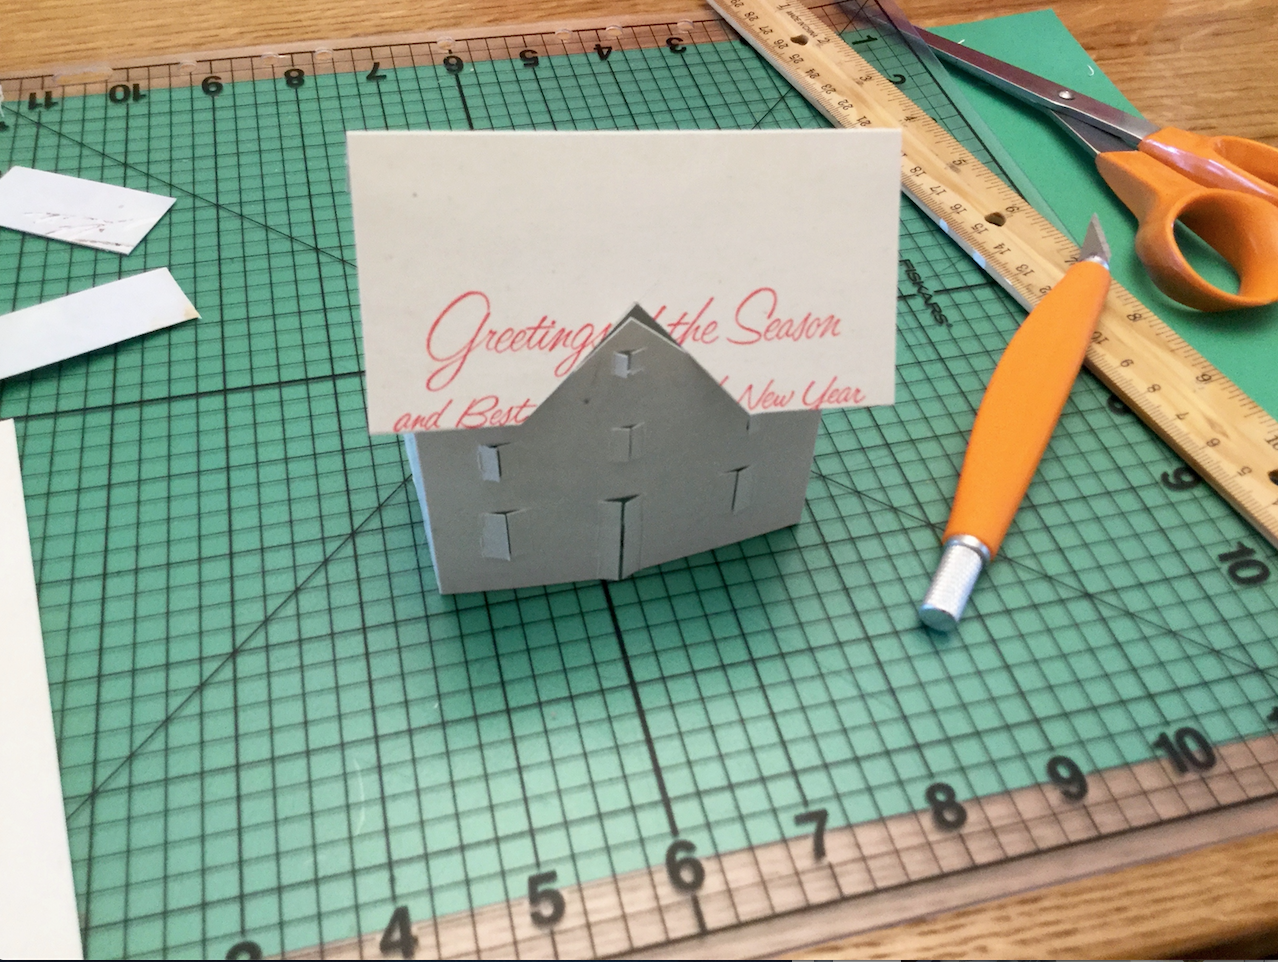 5 Each house fac?ade determined the shape of the roof, and using the crease made making each roof so much easier MyFixitUpLife